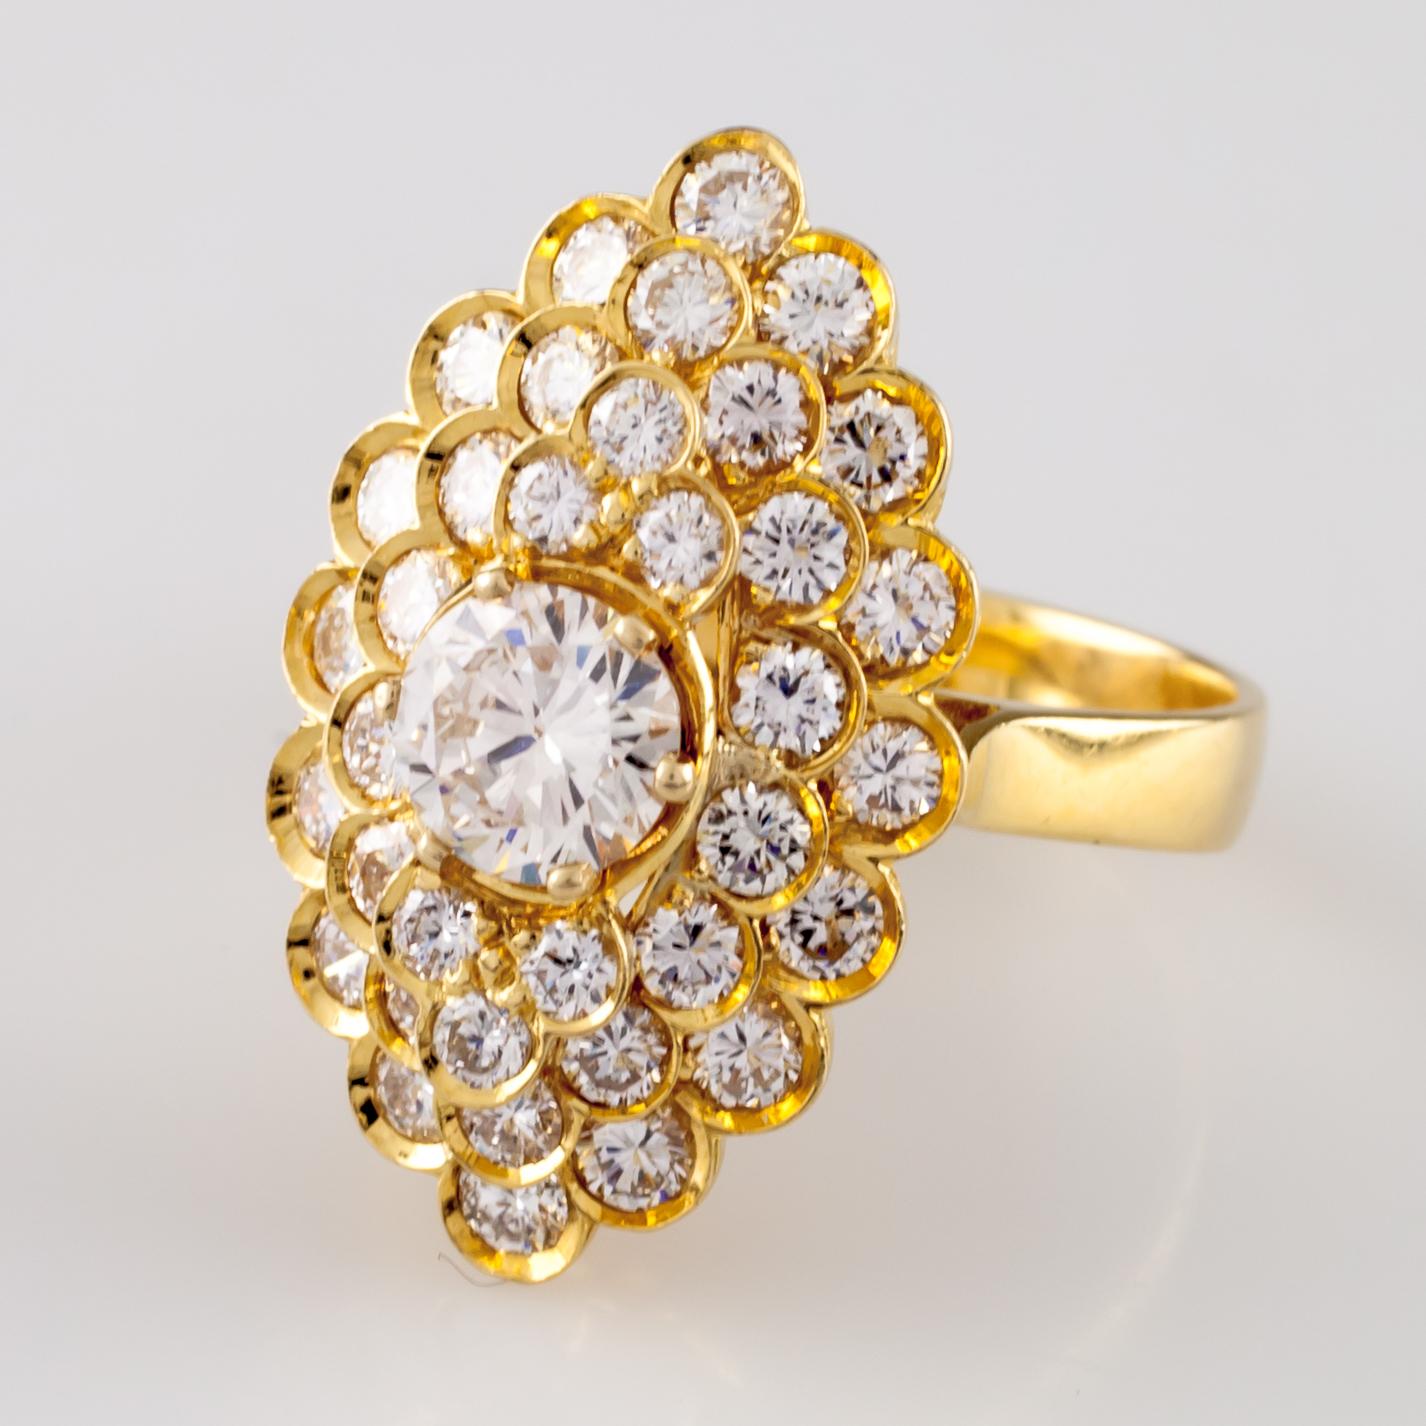 Gorgeous 18k Yellow Gold Diamond Cluster Ring
Features Channel-Set Accent Stones in a Terraced Gallery Surrounding .82 ct Center Stone
Carat Weight of Accent Stones = Appx. 1.90 cts
Average Color = D
Average Clarity = VS
GIA-Certified Center Stone.